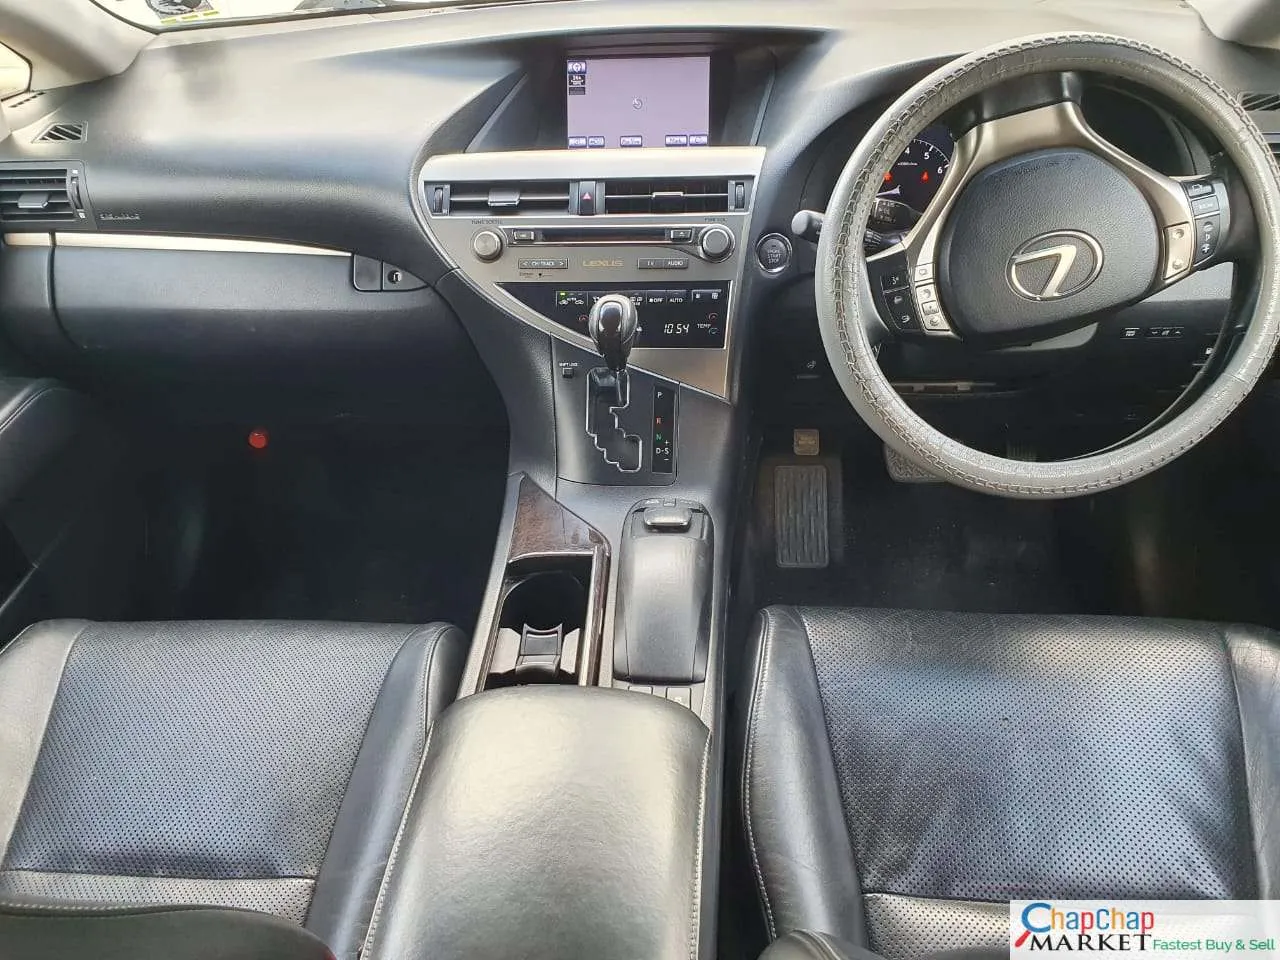 LEXUS RX 350 SUNROOF Asian Owner 🔥 You Pay 30% Deposit Trade in OK EXCLUSIVE For Sale in Kenya